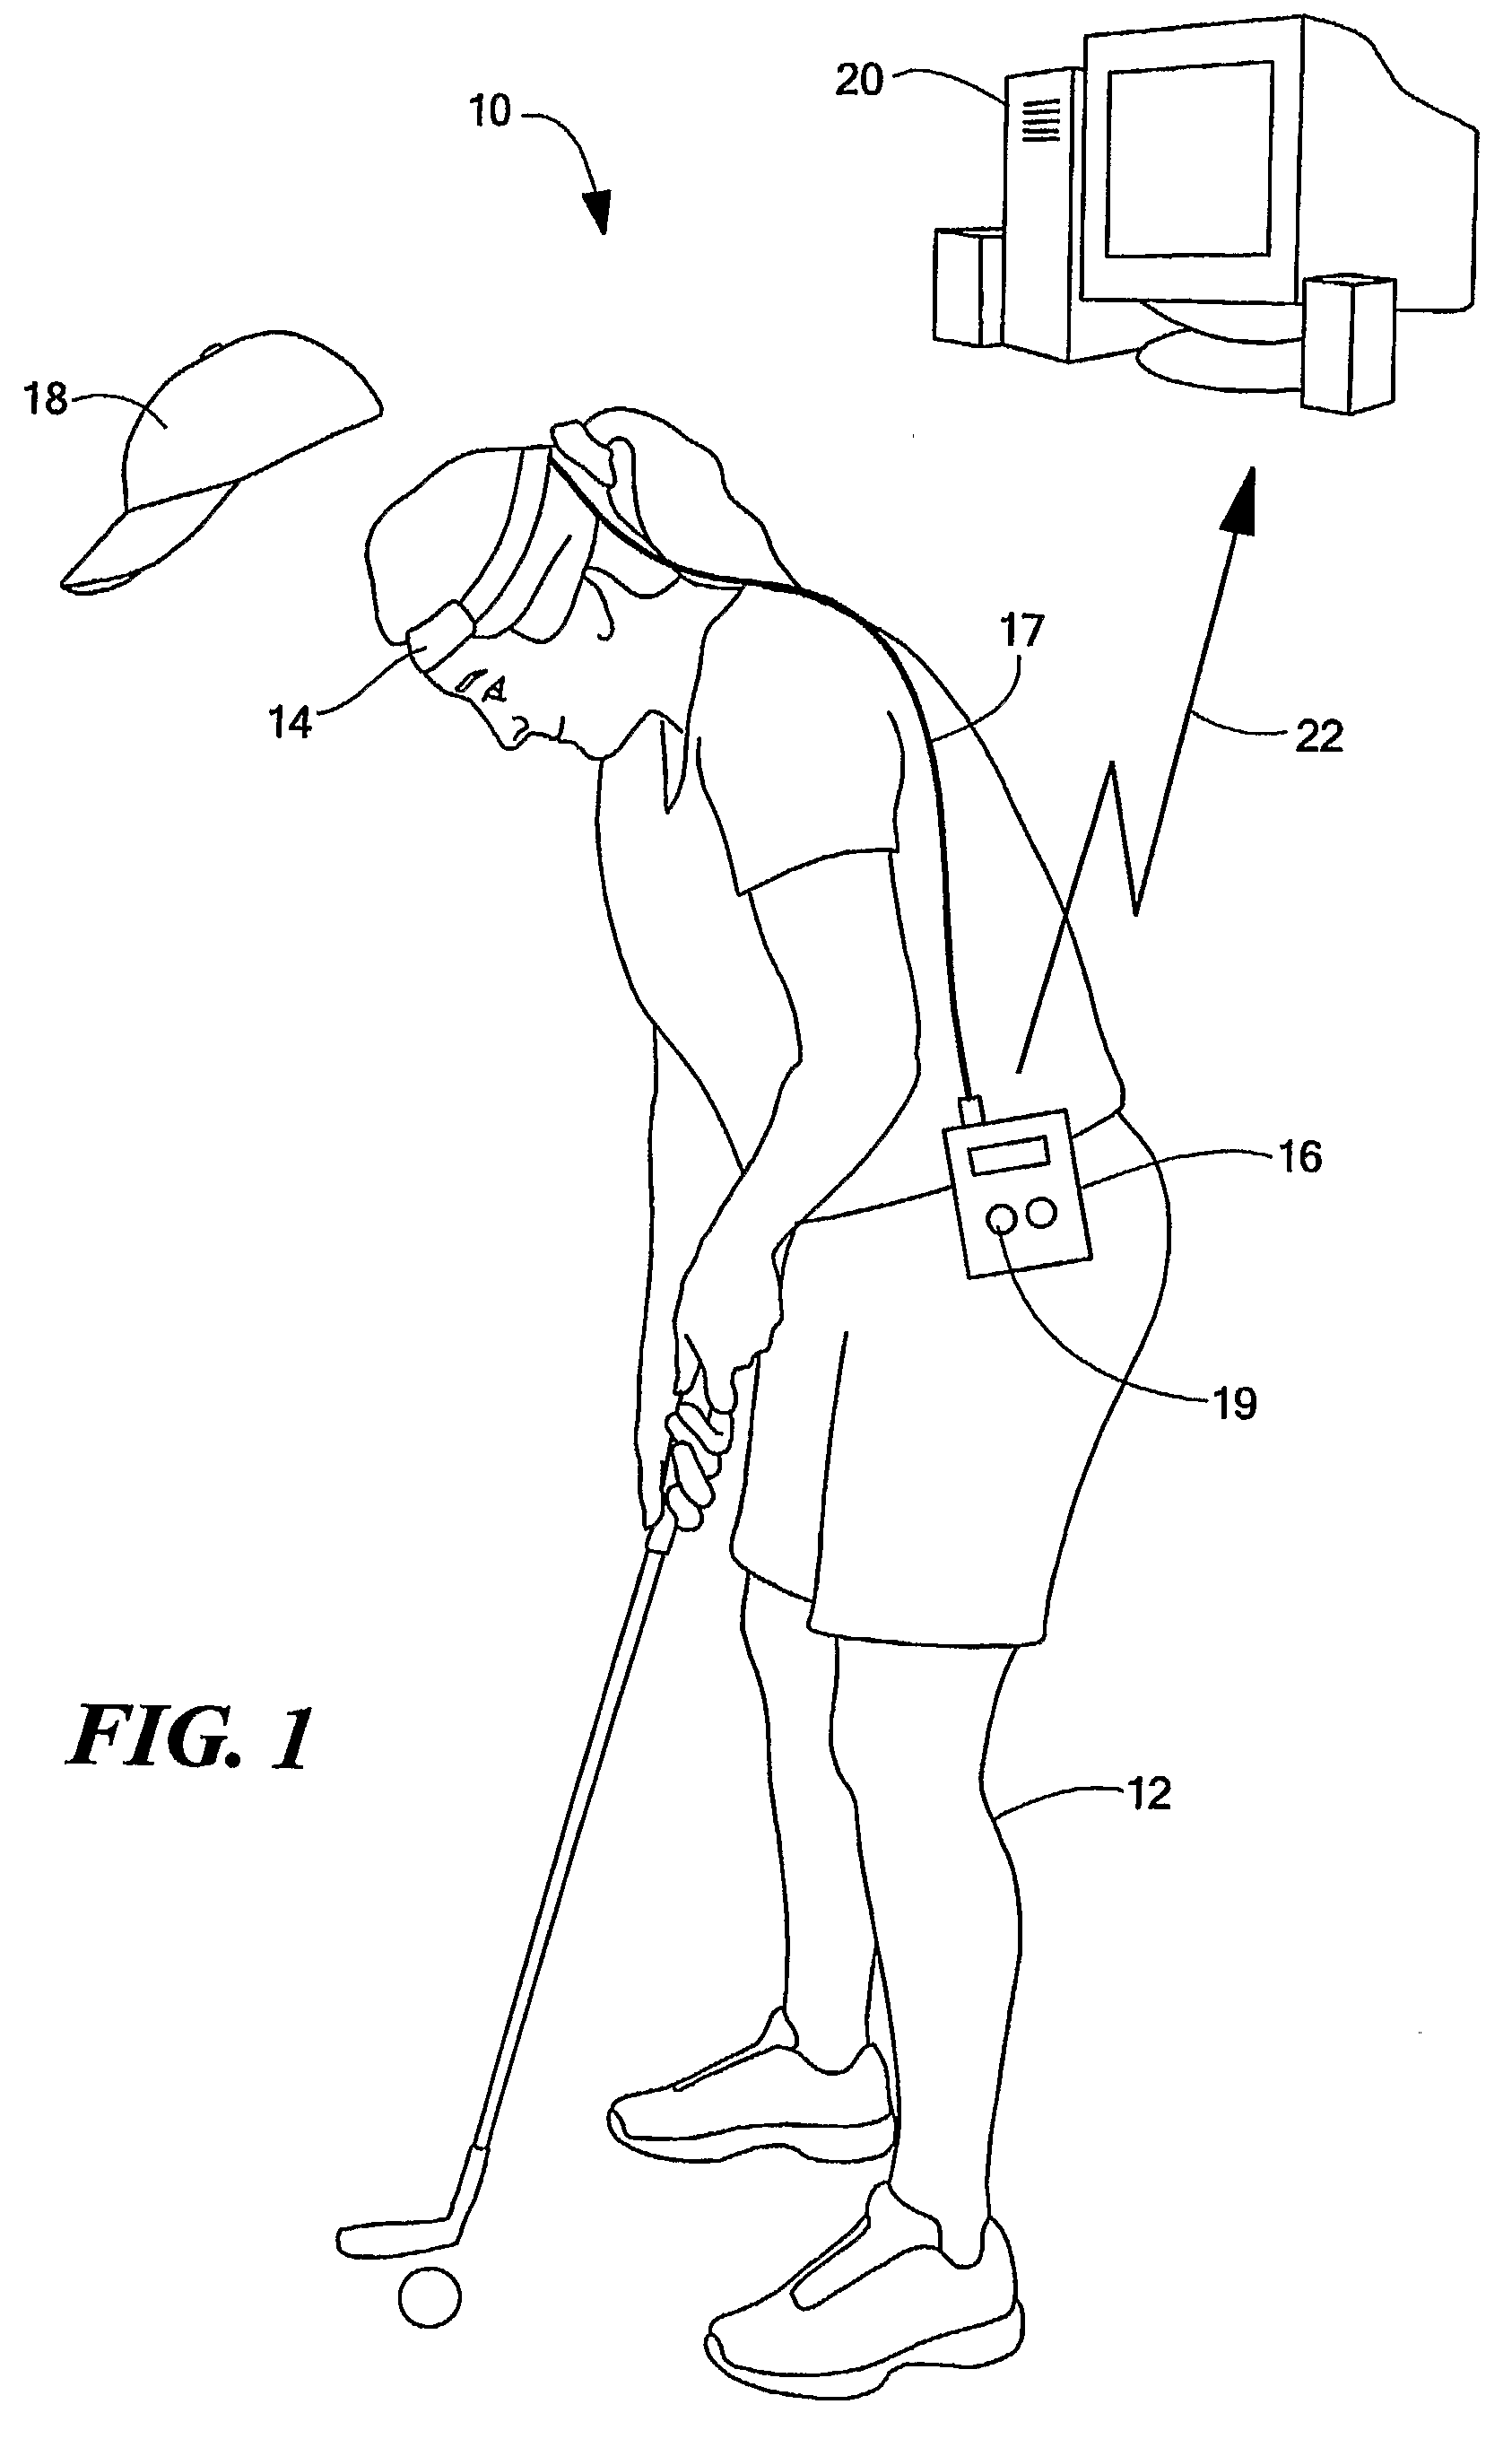 Electro-Optical System, Apparatus, and Method For Ambulatory Monitoring